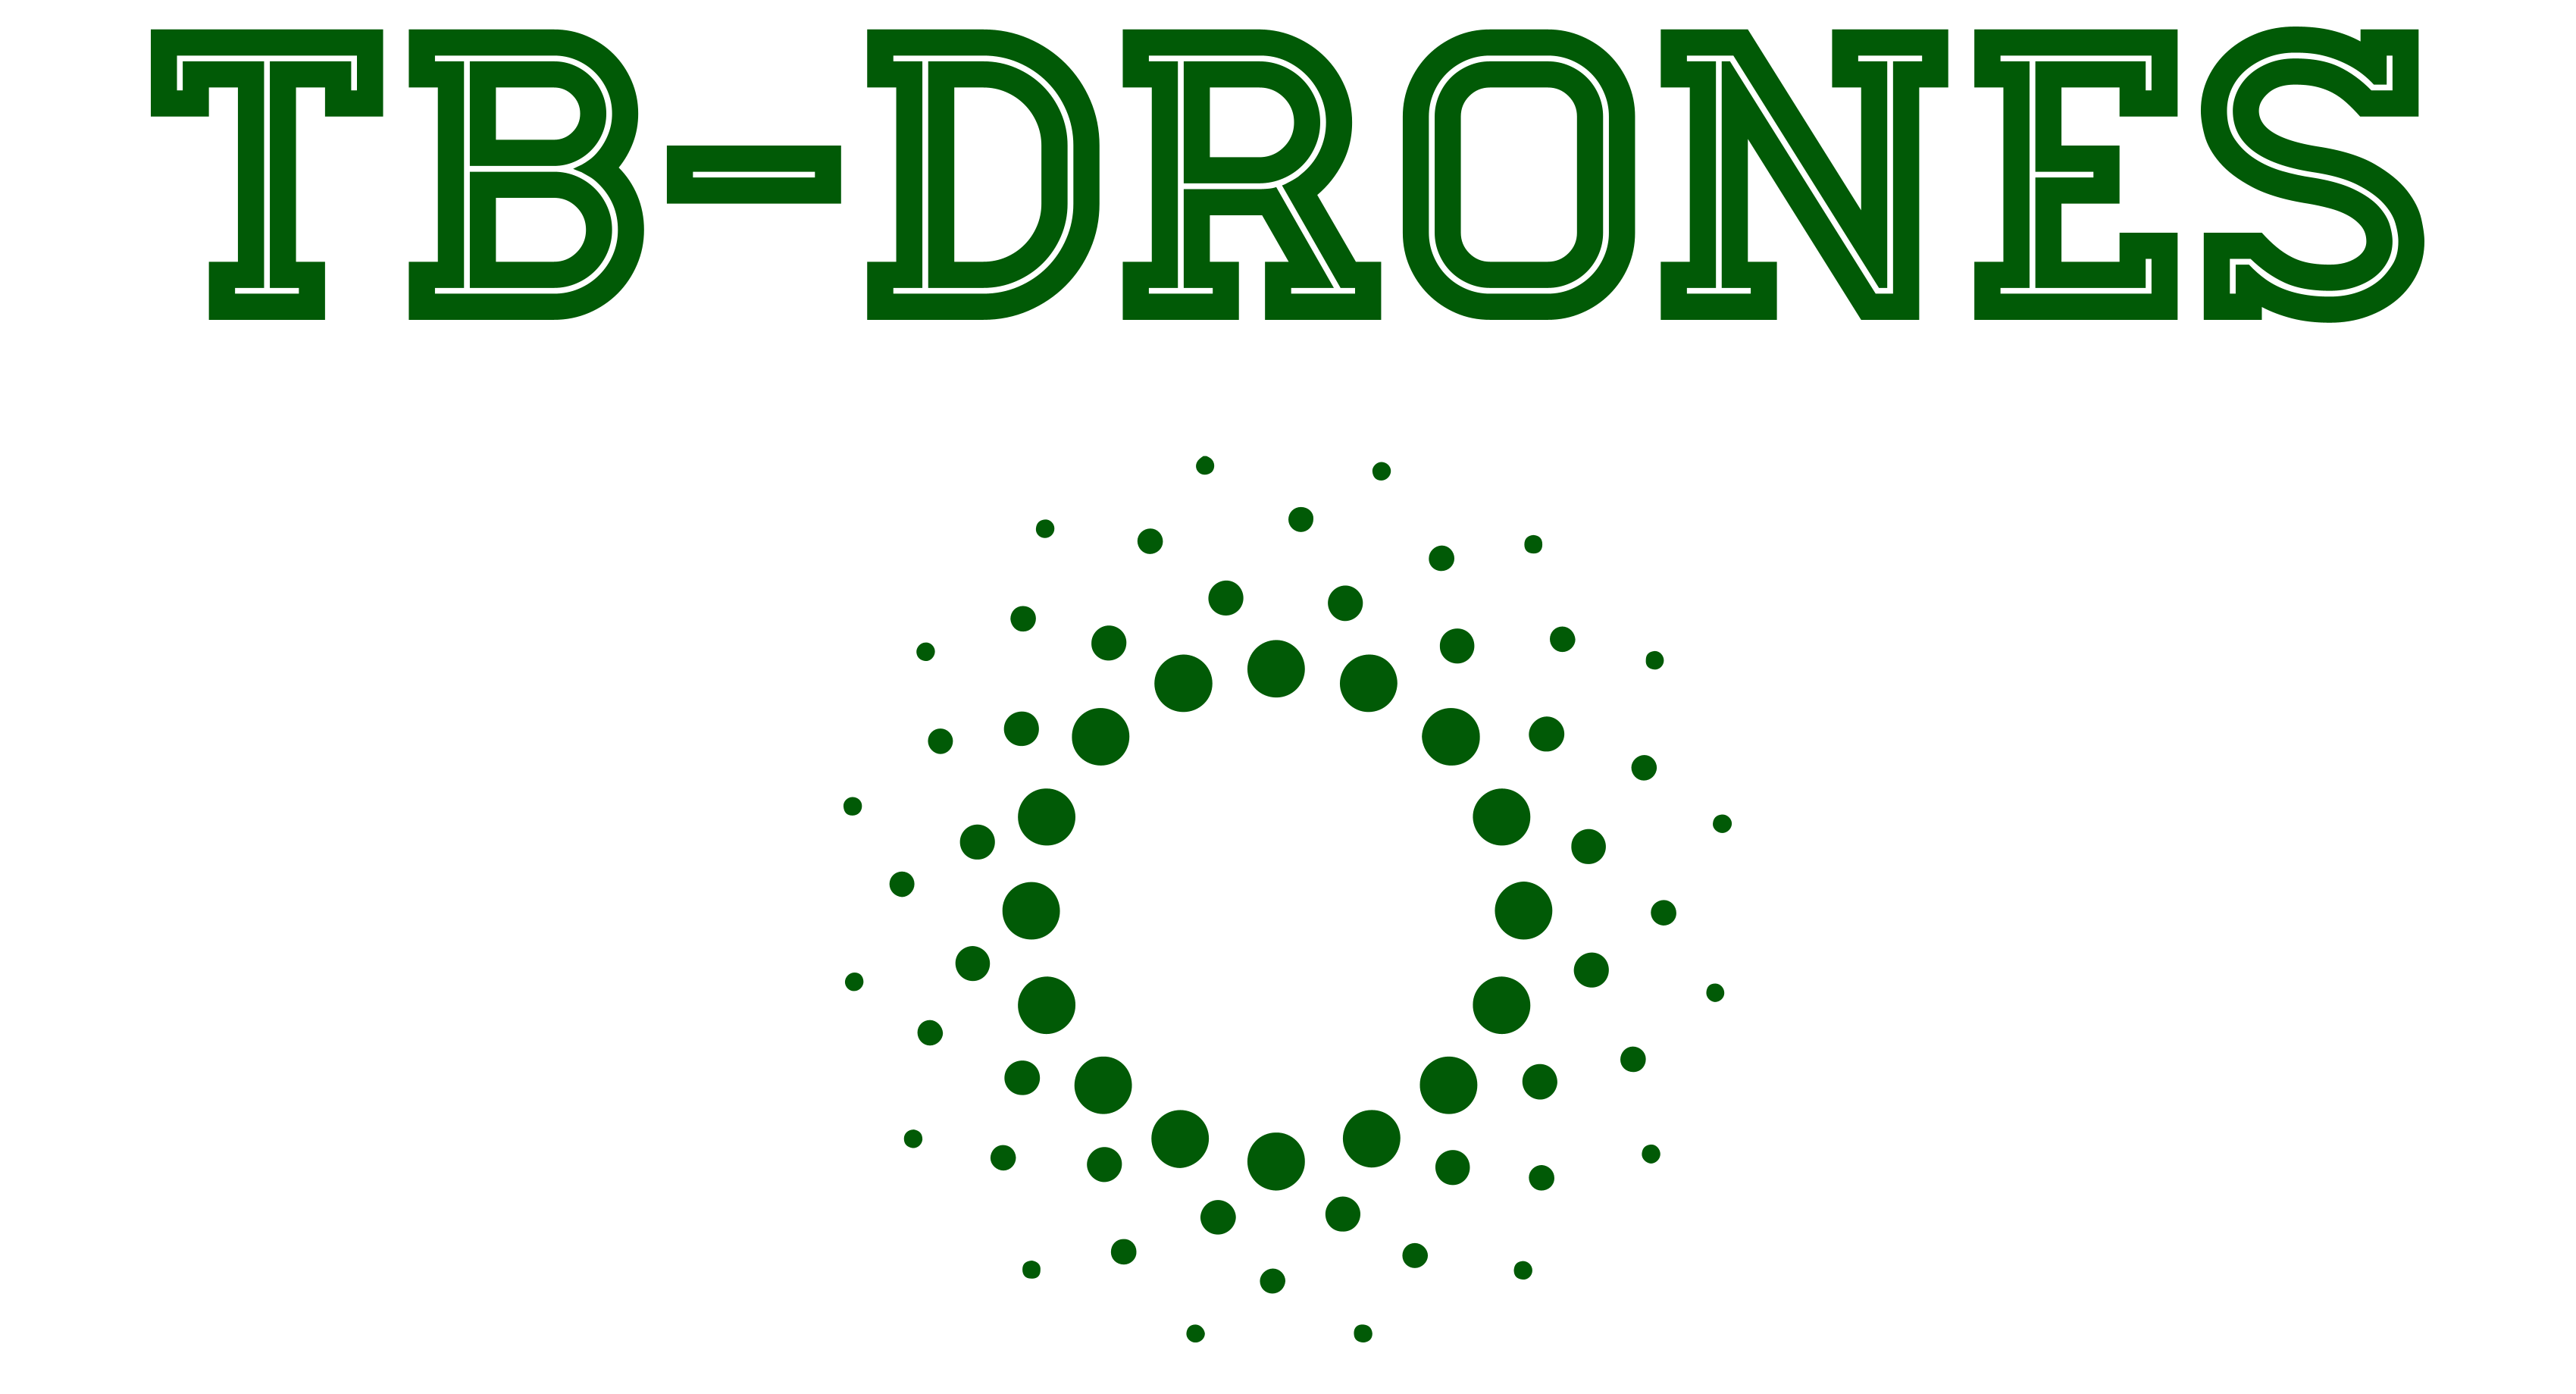 Tb-drones logo on a black background.